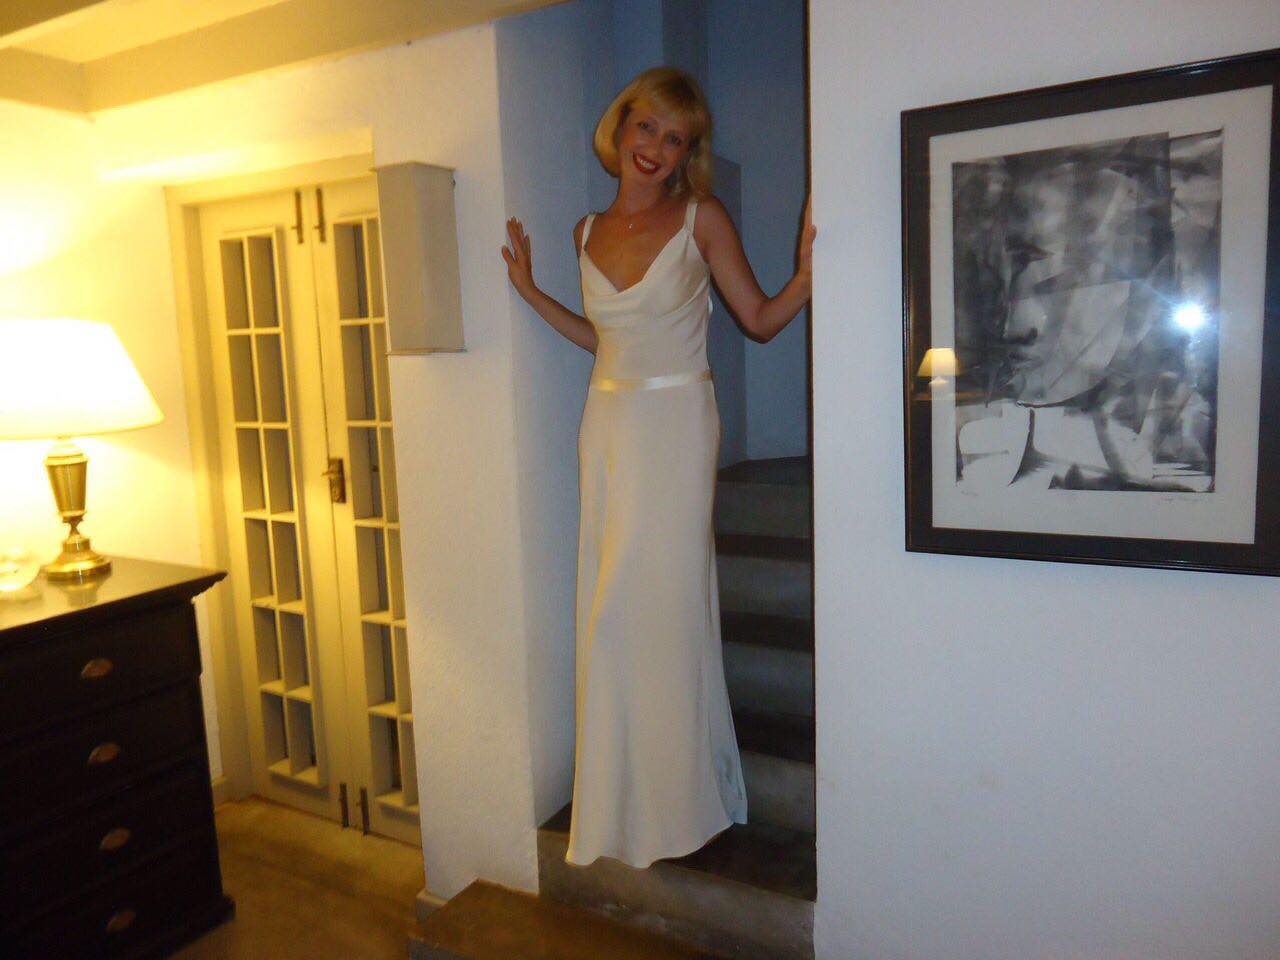 Ellie standing on stairs in a white dress